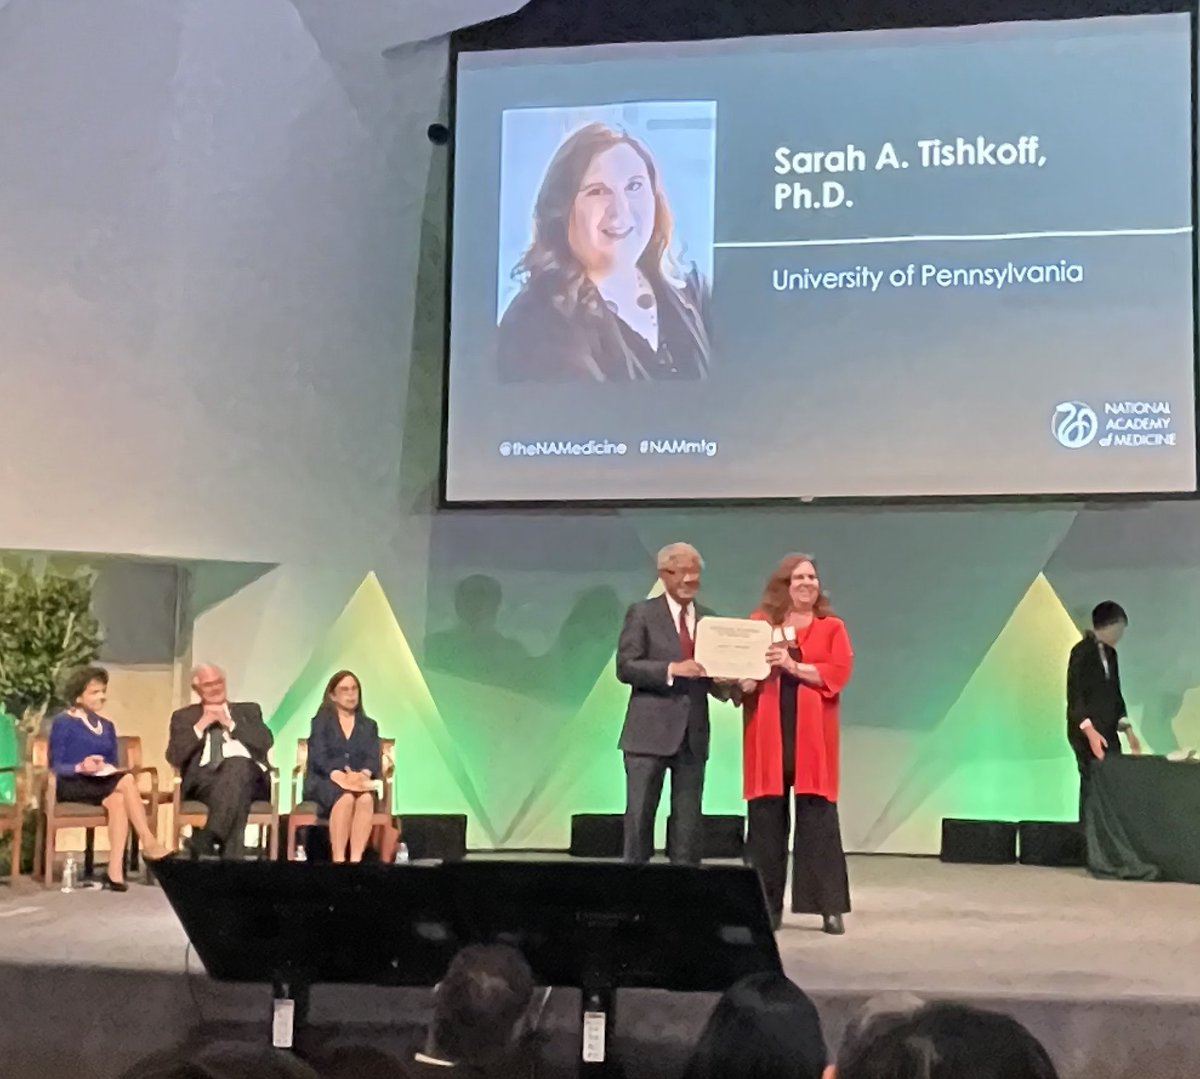 Congratulations to my colleague @SarahTishkoff for her induction into the National Academy of Medicine. She has been an inspiration to me for so many years. It was such a honor to be in the same class at @theNAMedicine.